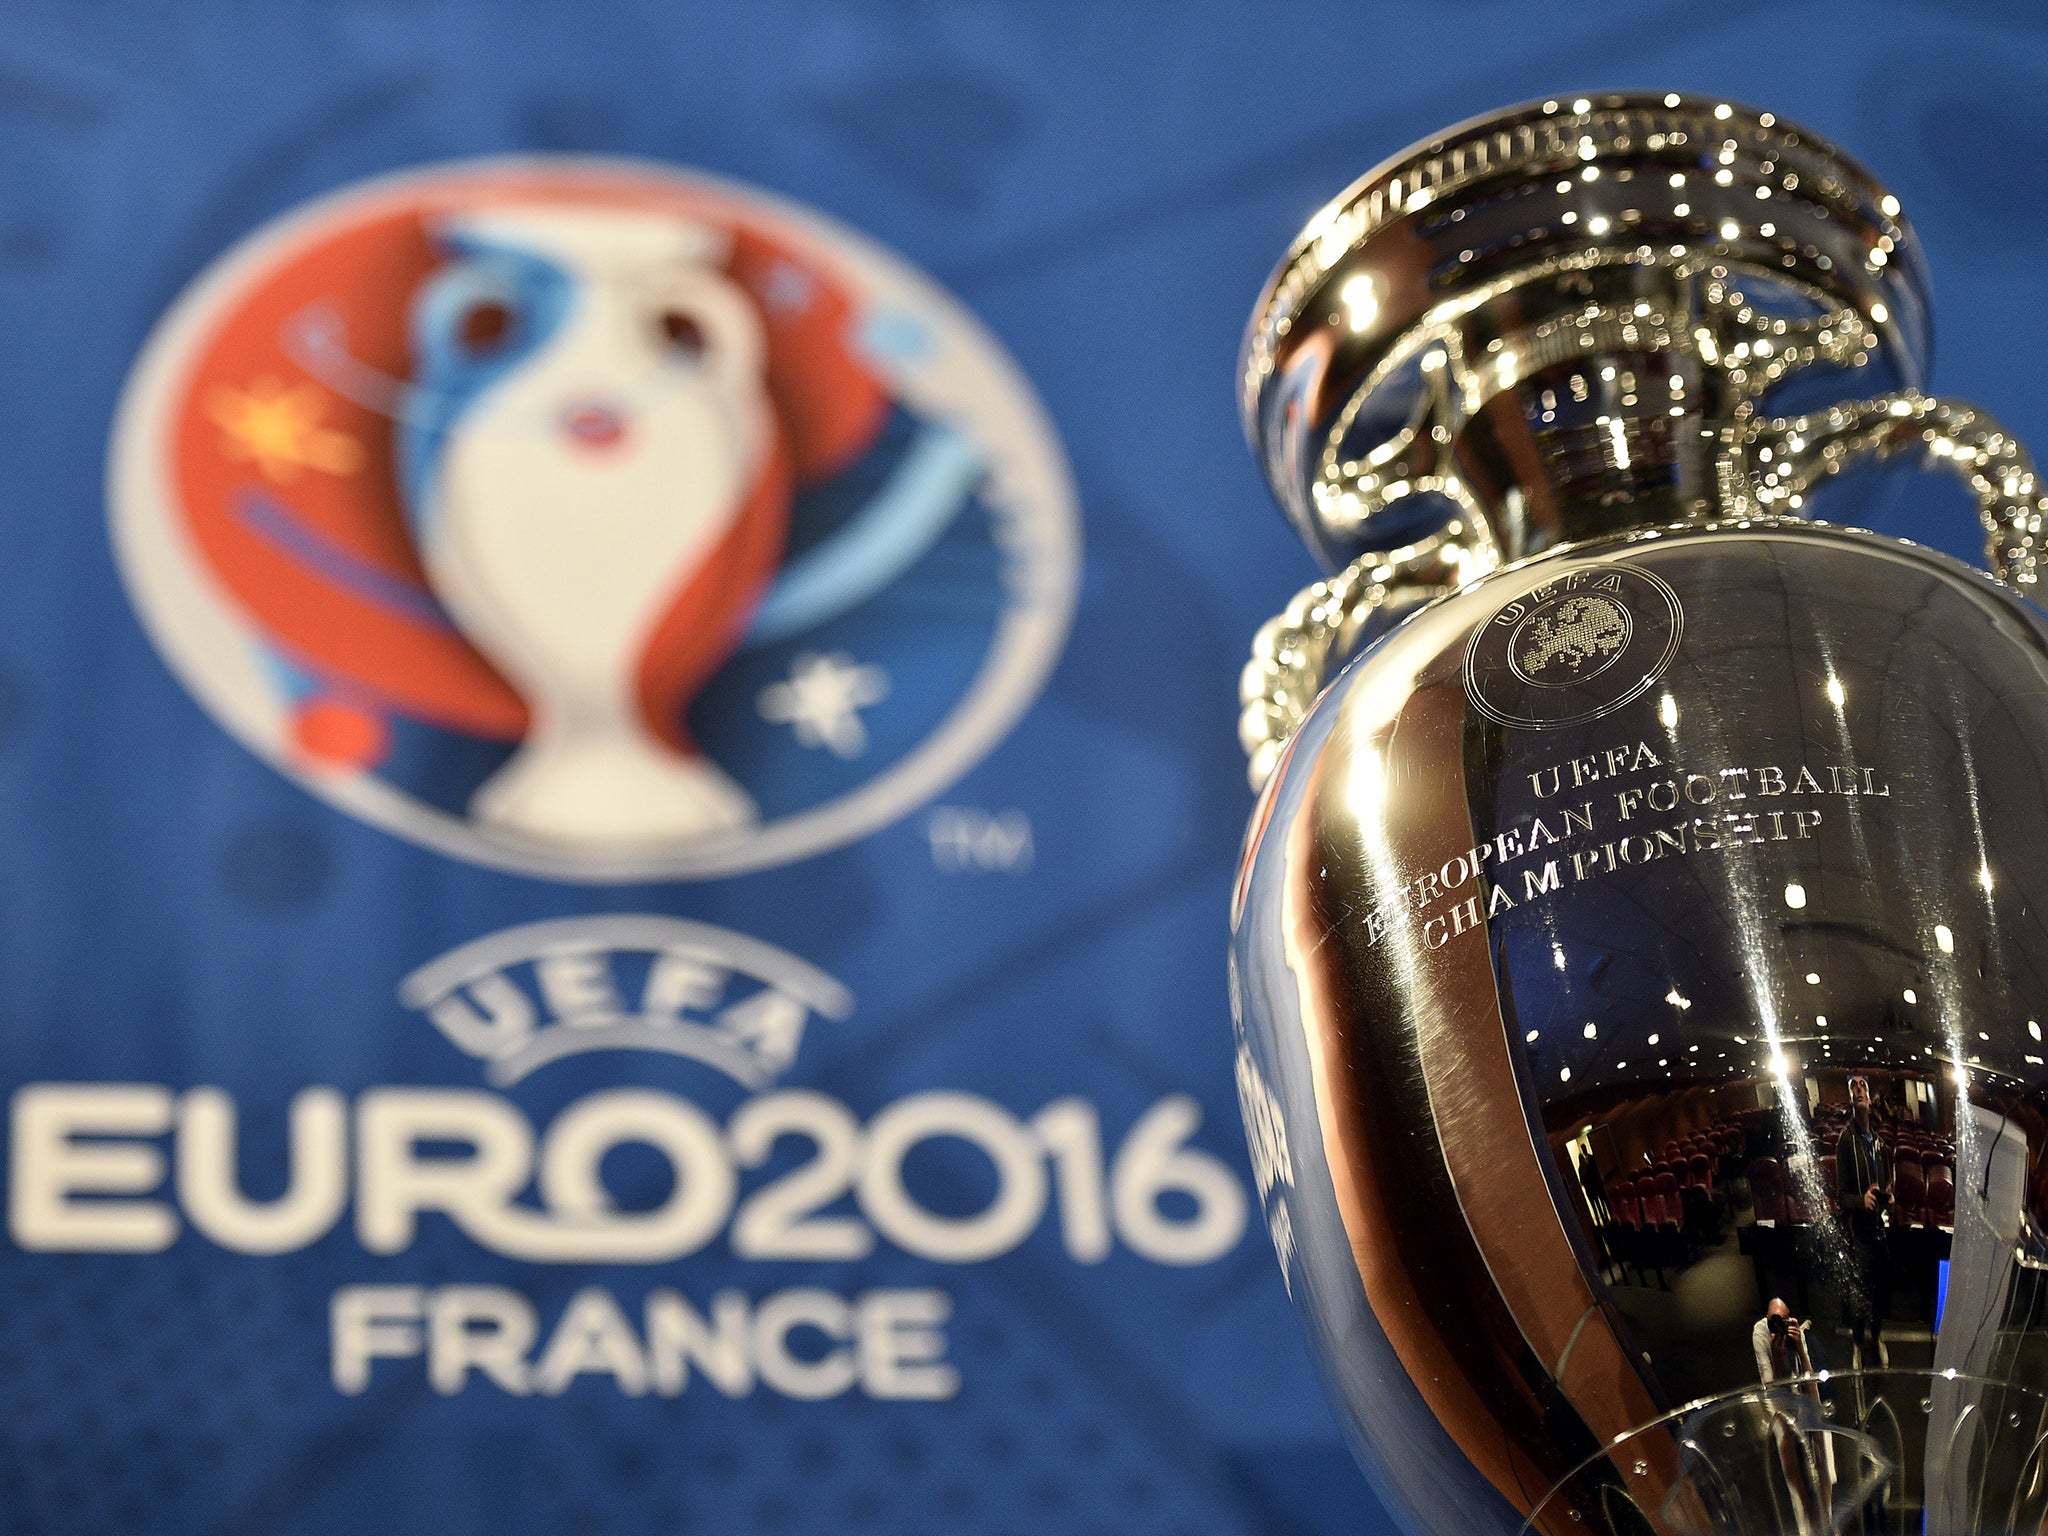 Euro 2016 tickets go on sale from £18 for group games to £650 ...